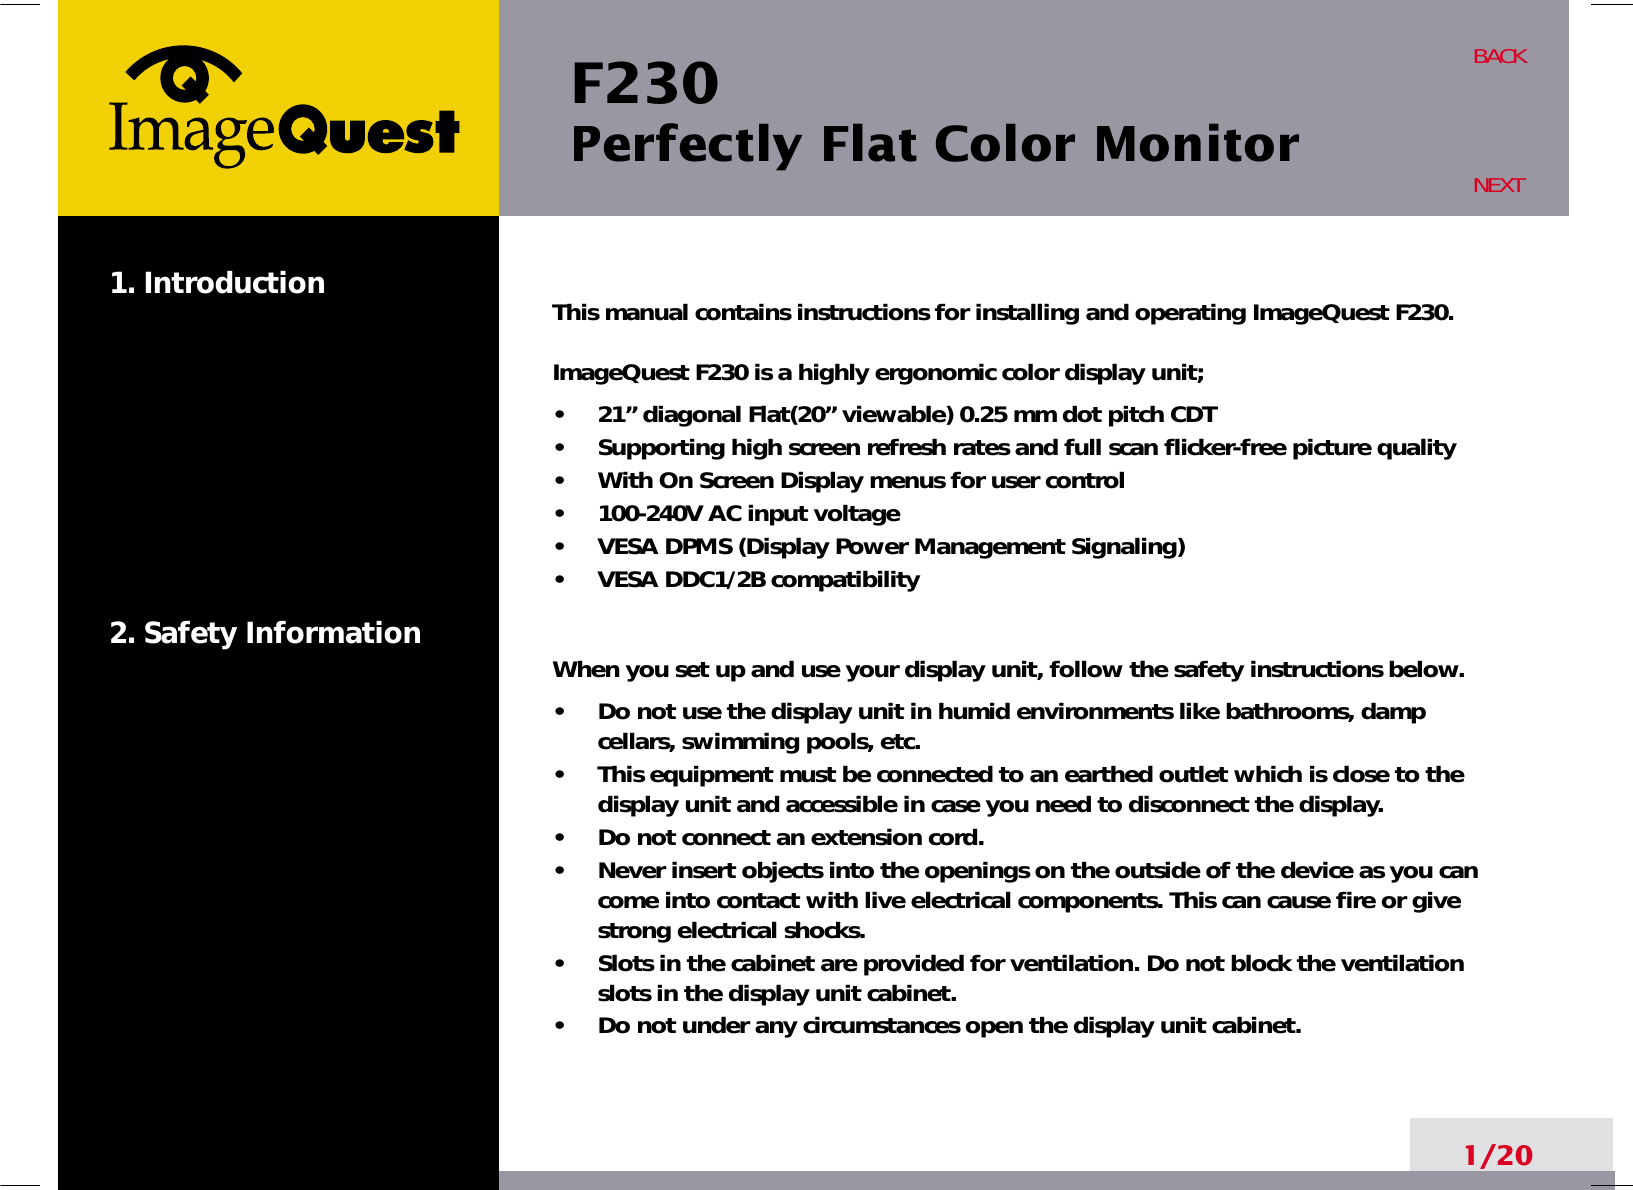 F230 Perfectly Flat Color Monitor1/20BACKNEXT1. Introduction2. Safety InformationThis manual contains instructions for installing and operating ImageQuest F230. ImageQuest F230 is a highly ergonomic color display unit; •     21” diagonal Flat(20” viewable) 0.25 mm dot pitch CDT•     Supporting high screen refresh rates and full scan flicker-free picture quality•     With On Screen Display menus for user control•     100-240V AC input voltage•     VESA DPMS (Display Power Management Signaling)•     VESA DDC1/2B compatibilityWhen you set up and use your display unit, follow the safety instructions below.•     Do not use the display unit in humid environments like bathrooms, dampcellars, swimming pools, etc.•     This equipment must be connected to an earthed outlet which is close to thedisplay unit and accessible in case you need to disconnect the display.•     Do not connect an extension cord.•     Never insert objects into the openings on the outside of the device as you cancome into contact with live electrical components. This can cause fire or givestrong electrical shocks.•     Slots in the cabinet are provided for ventilation. Do not block the ventilationslots in the display unit cabinet.•     Do not under any circumstances open the display unit cabinet.